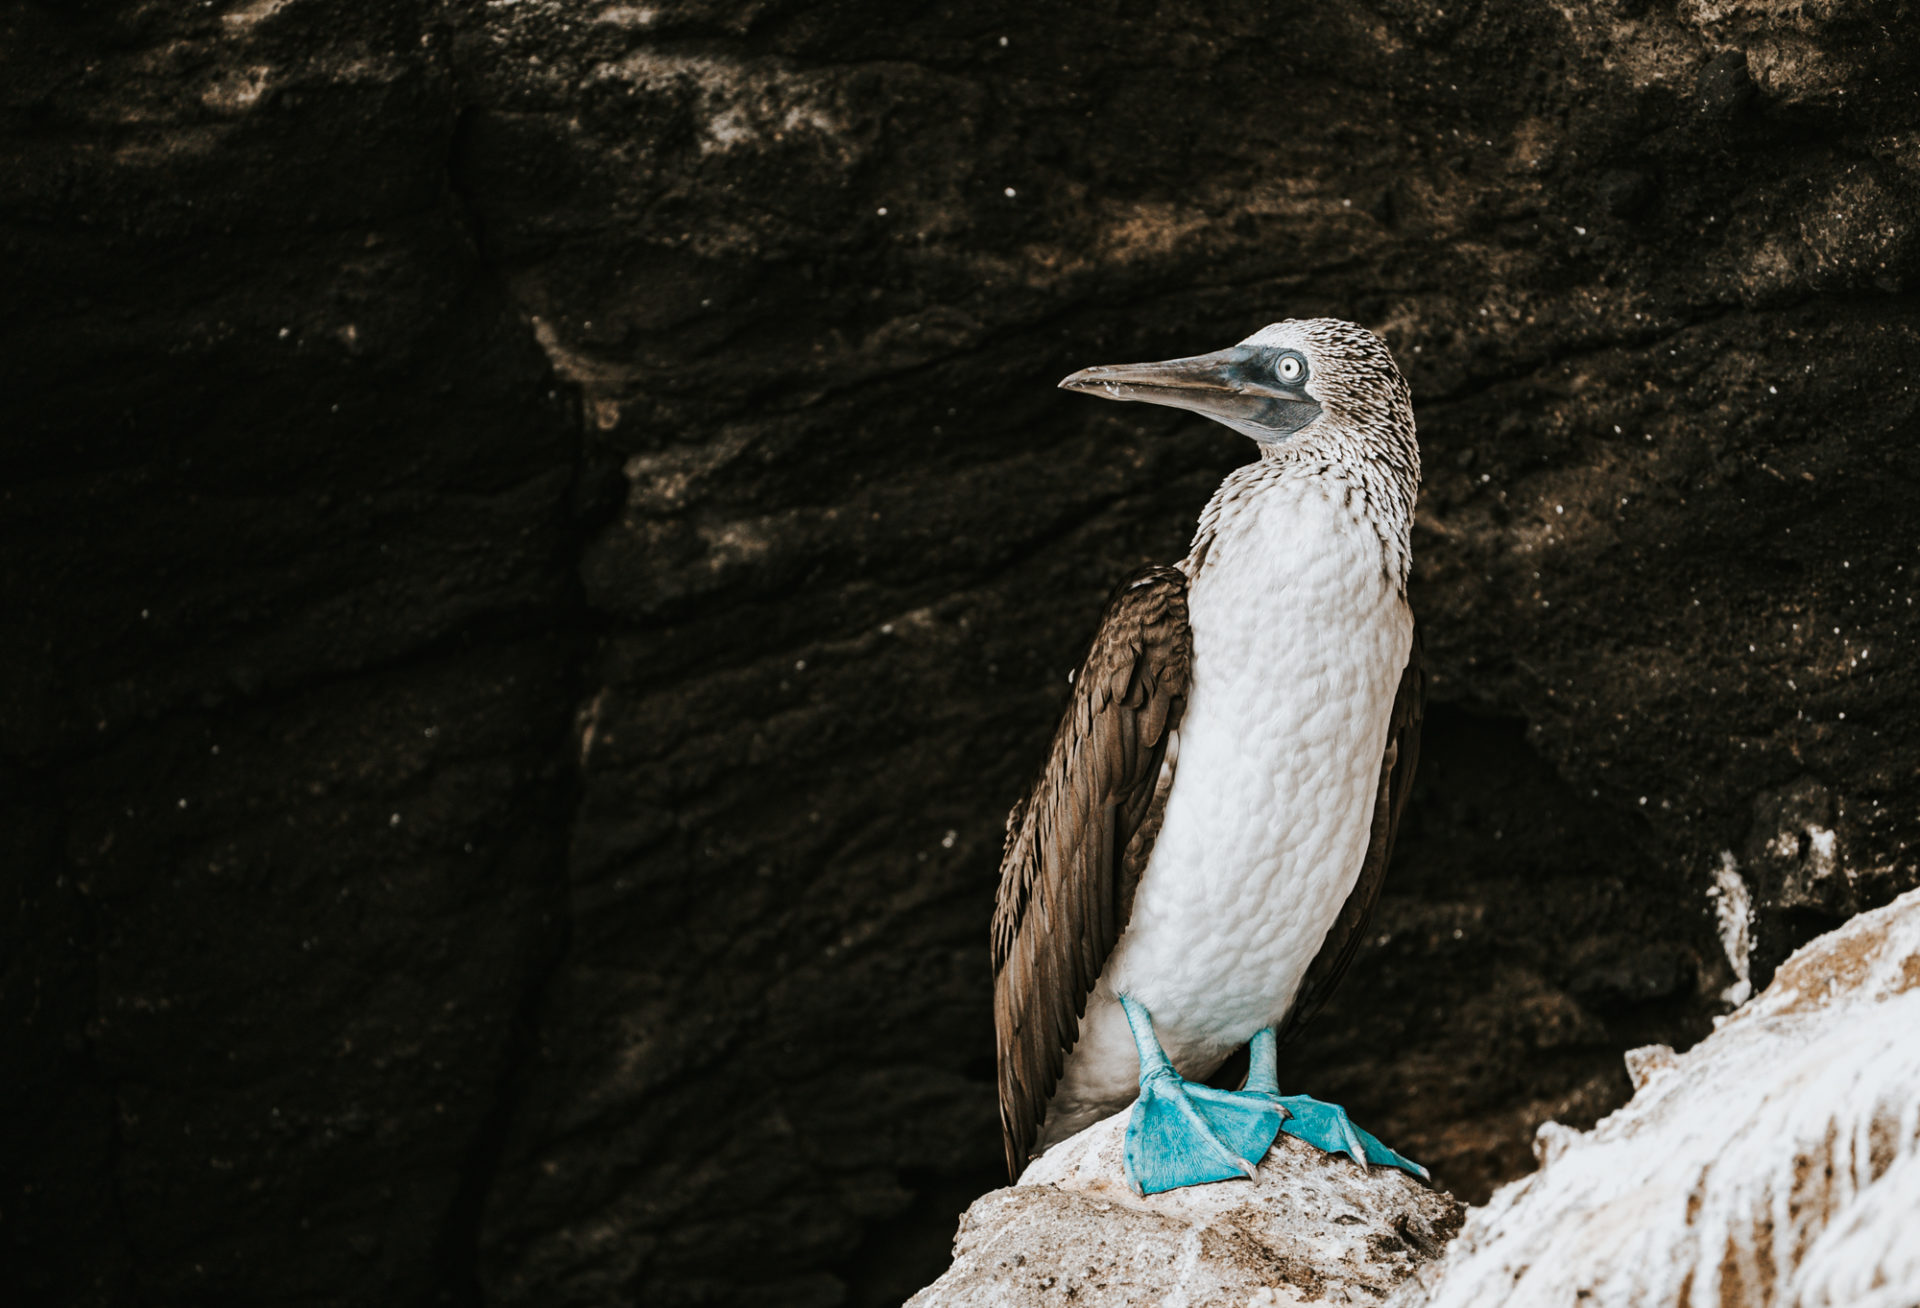 Blue footed booby on Santa Cruz in the Galapagos